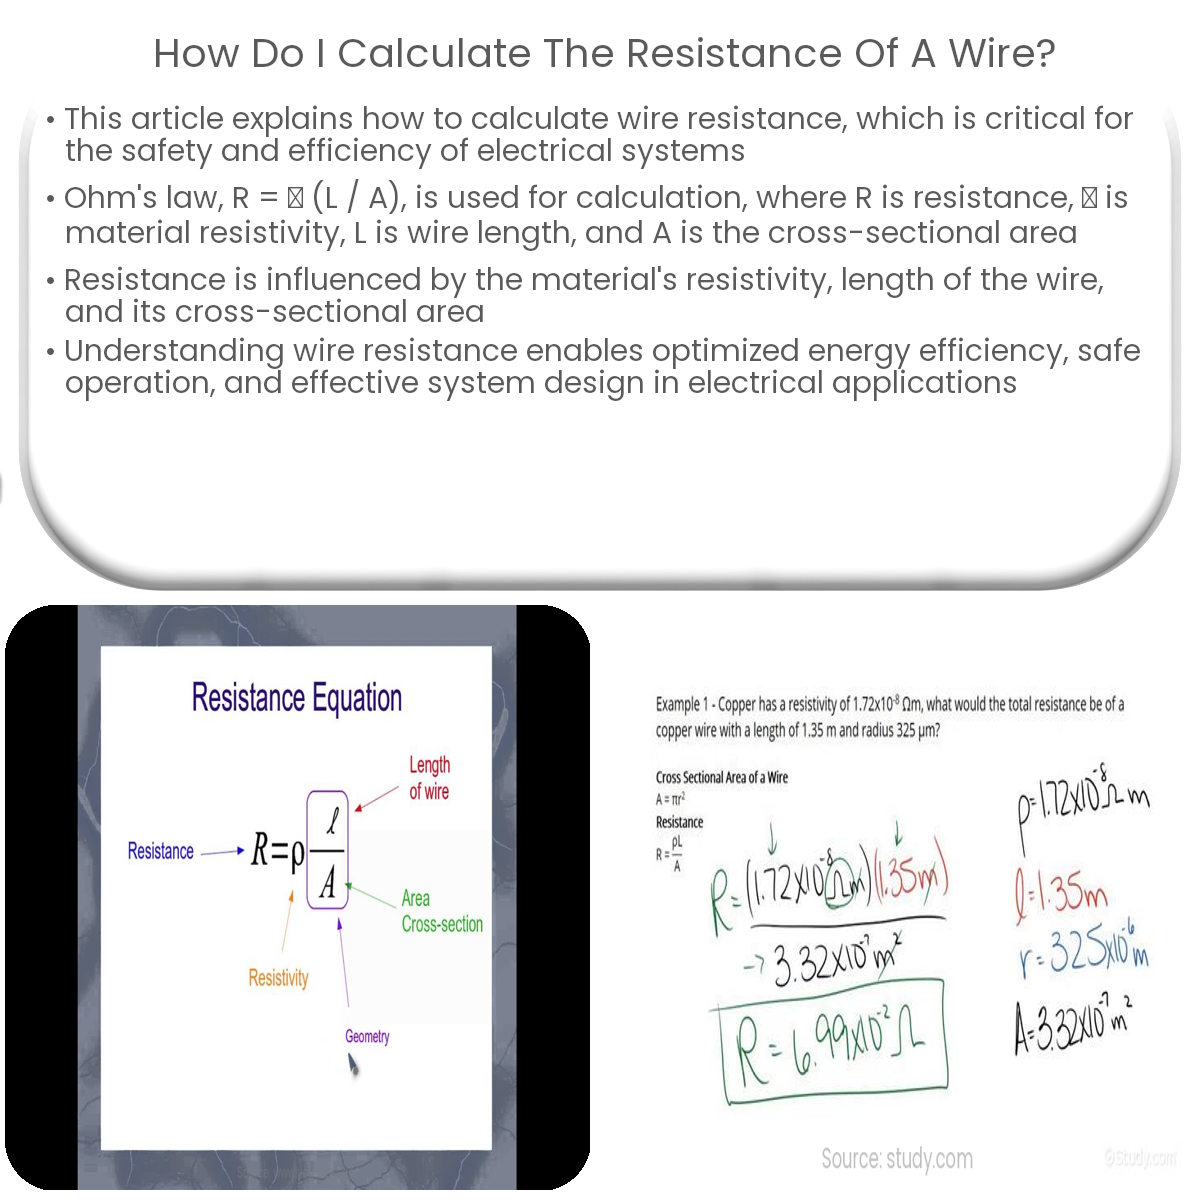 How do I calculate the resistance of a wire?